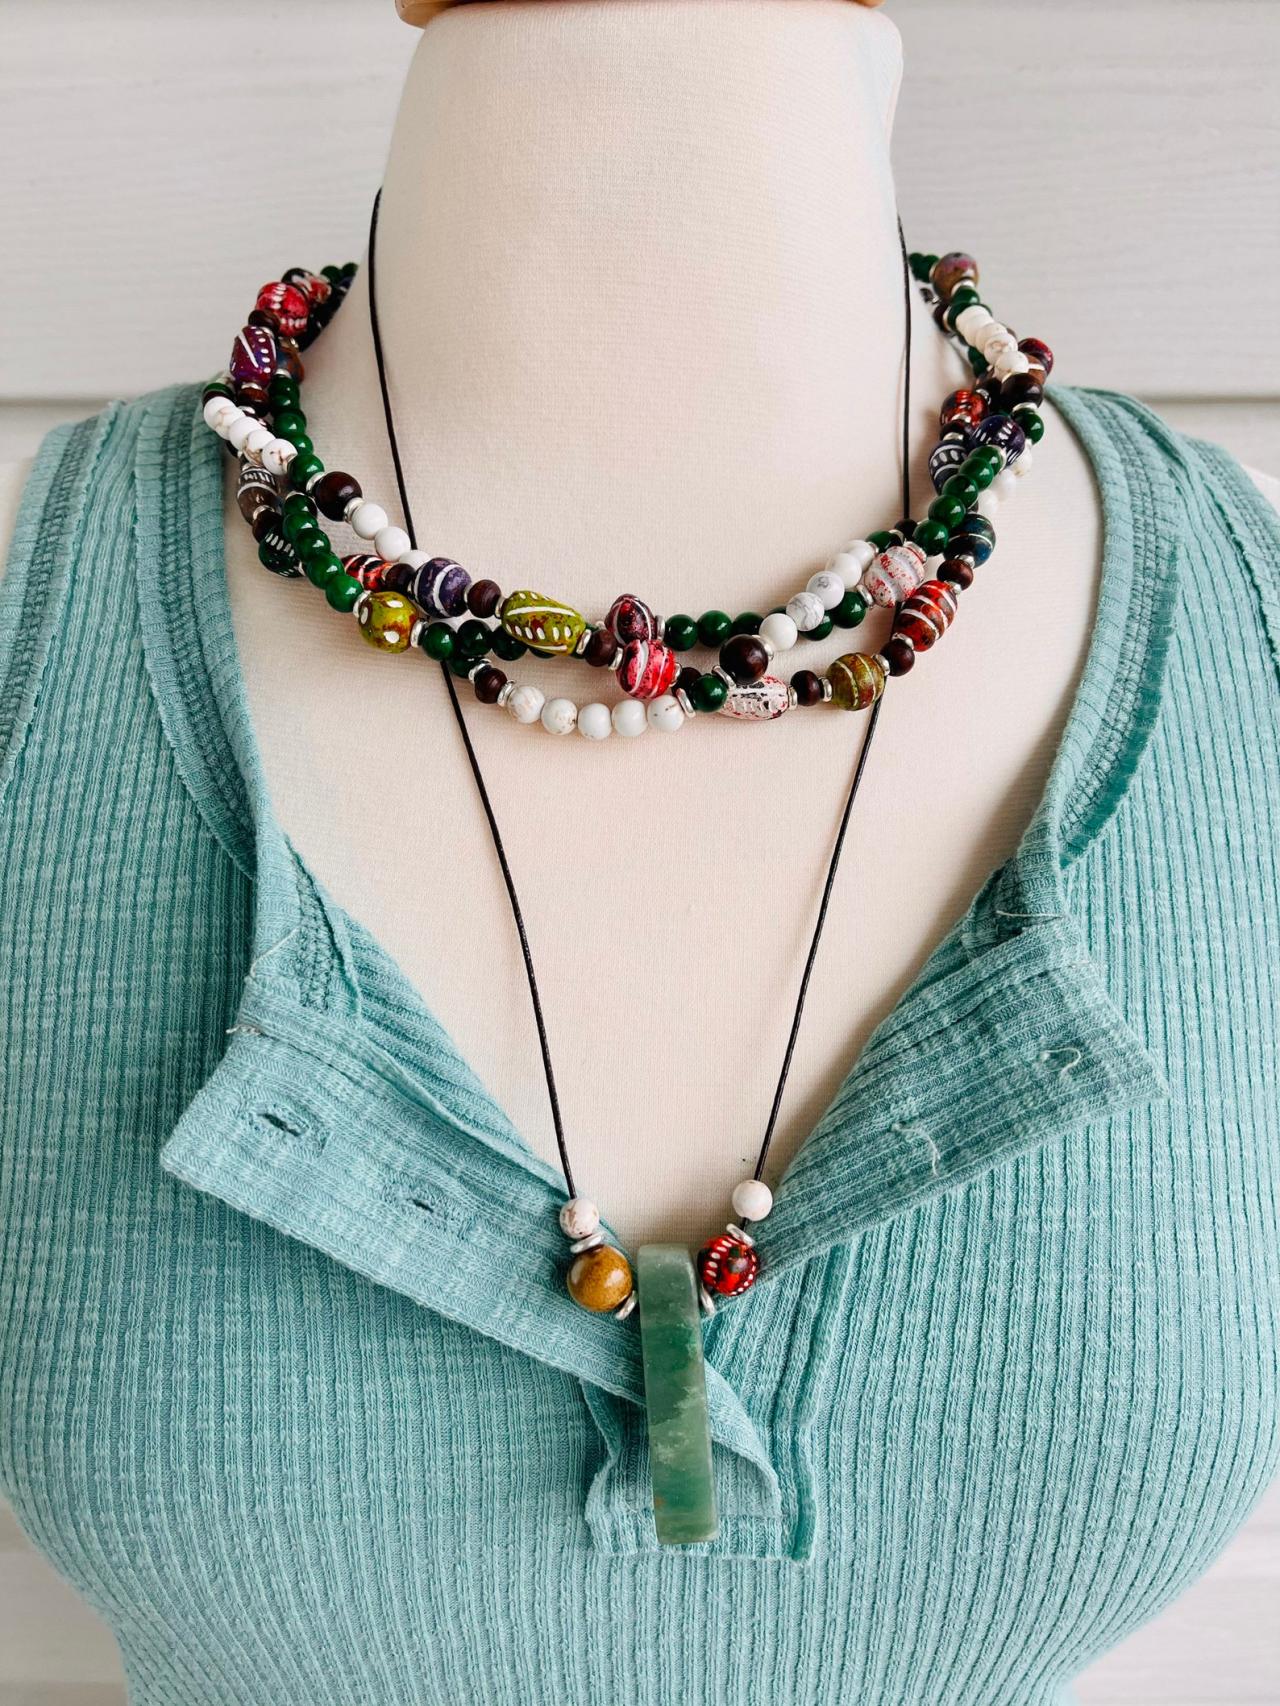 Painted Wood Beads, Forest Green Jade Beads, Chocolate Wood Beads And White Stone Braided Choker Necklace.